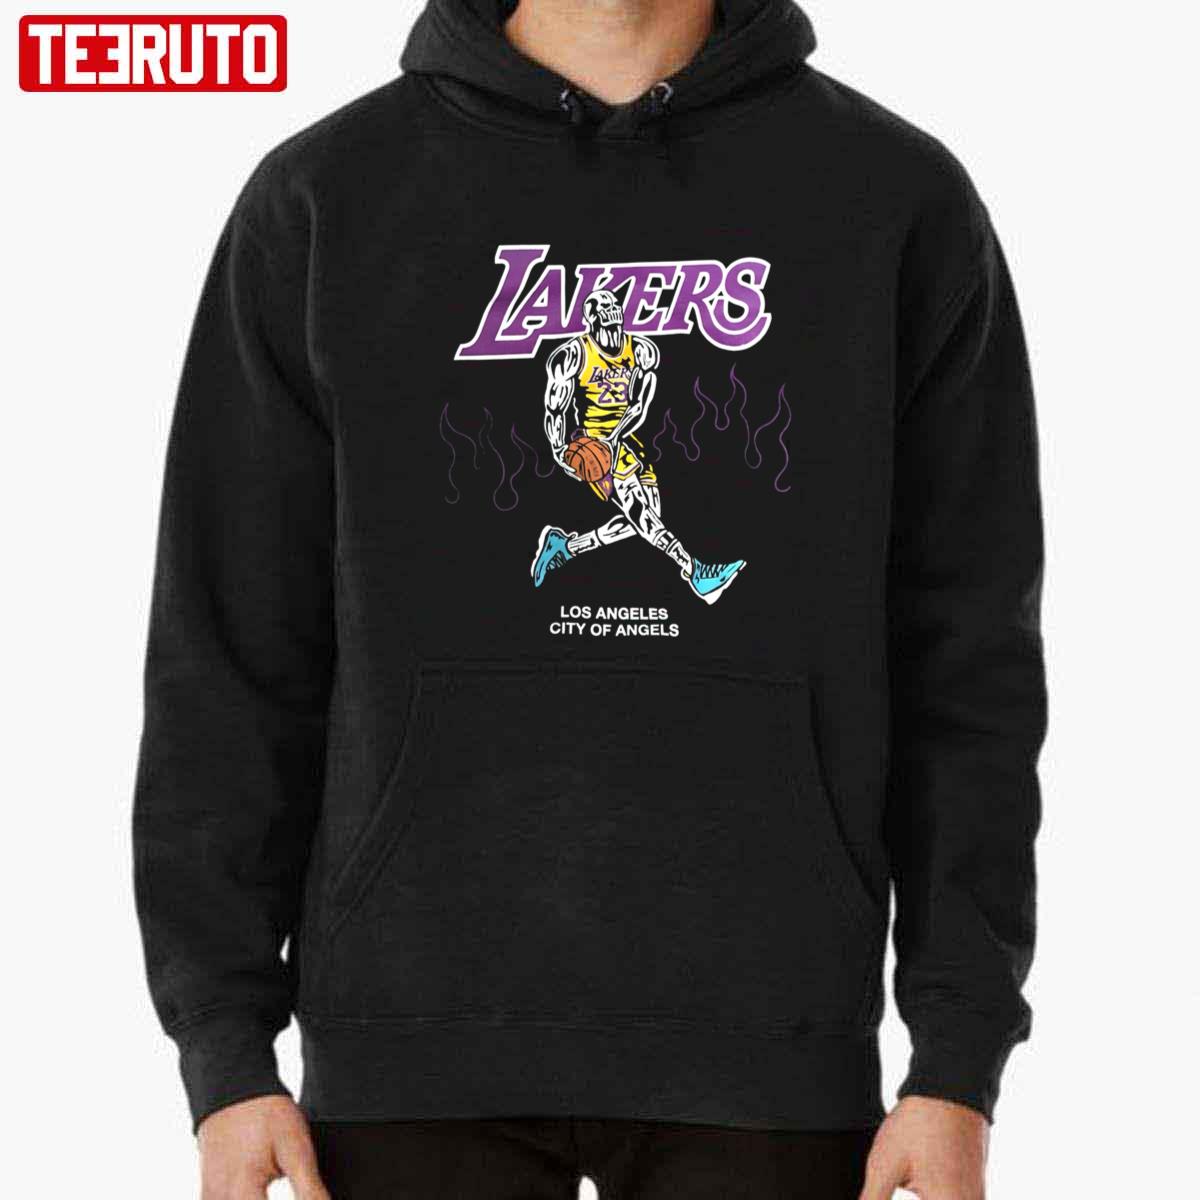 lotas lakers city of angels